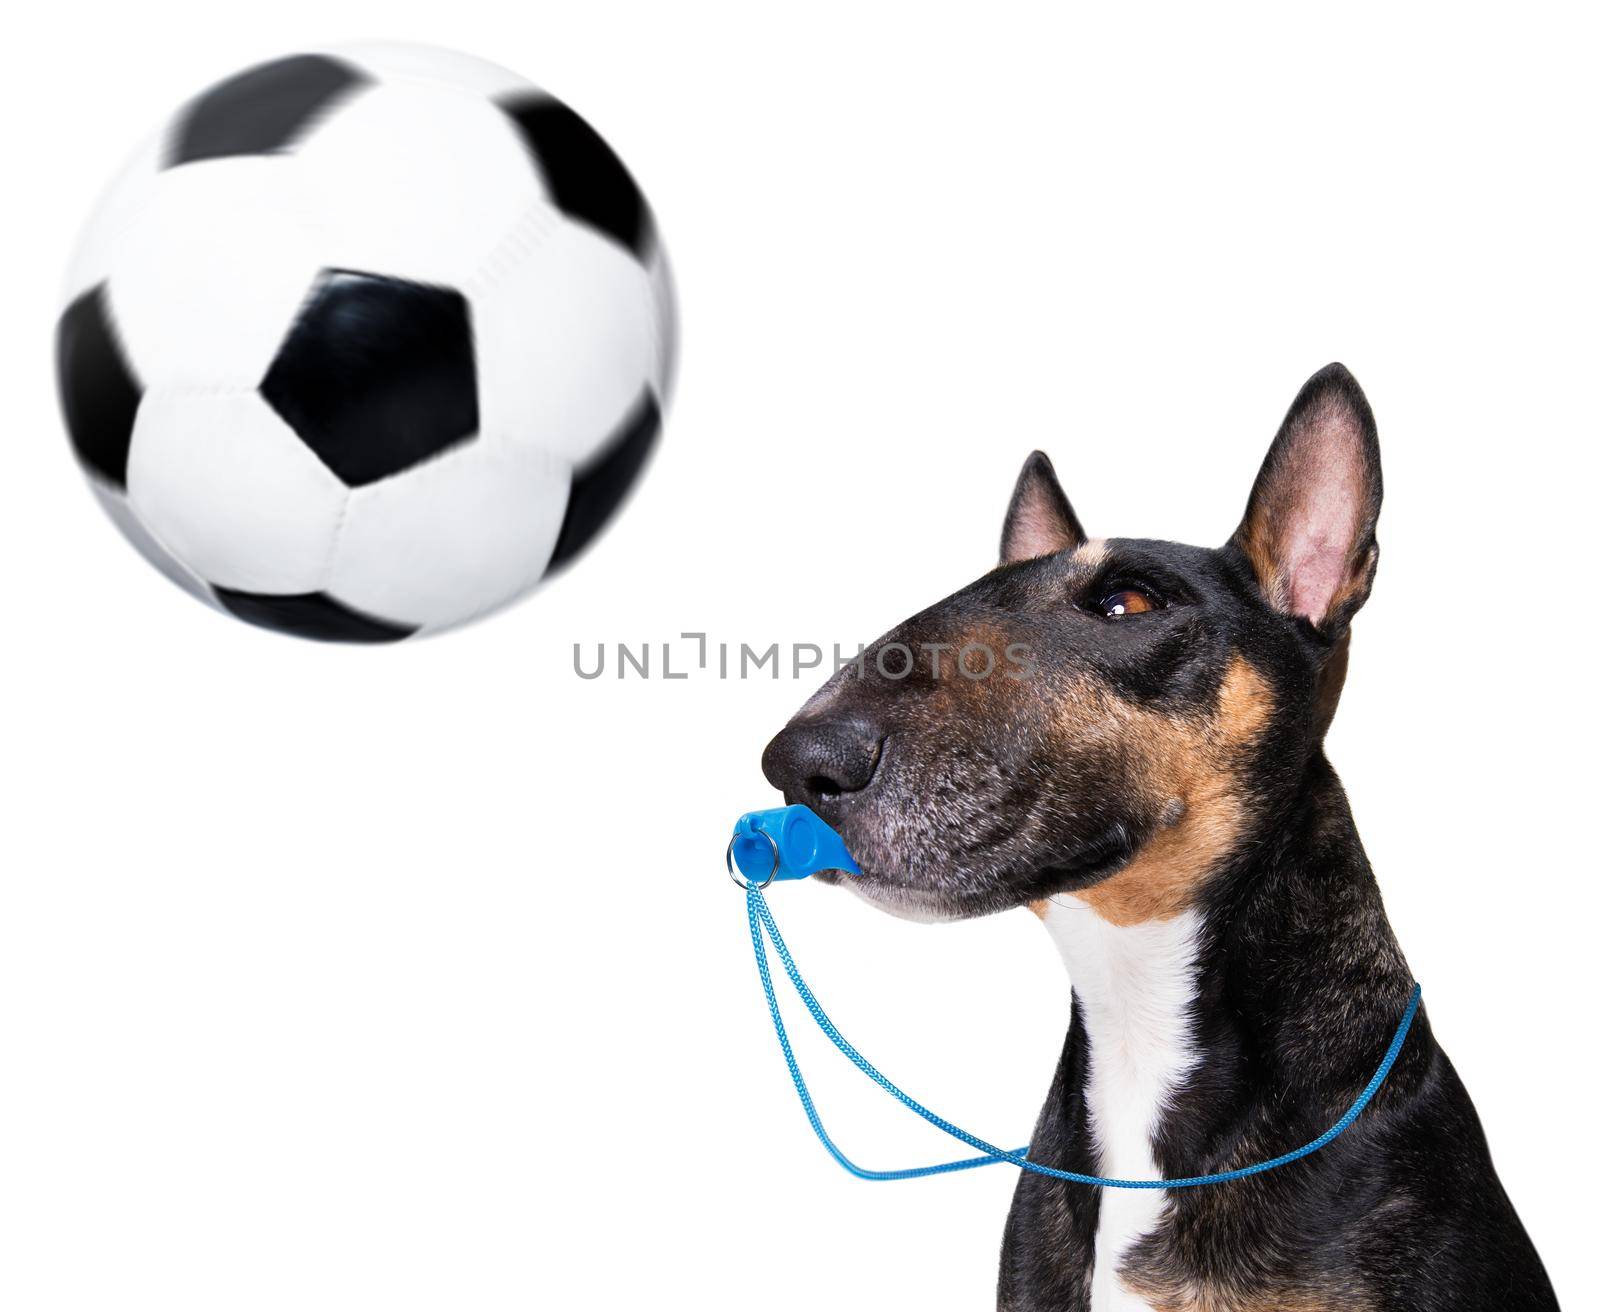 Referee arbitrator dog with whistle by Brosch